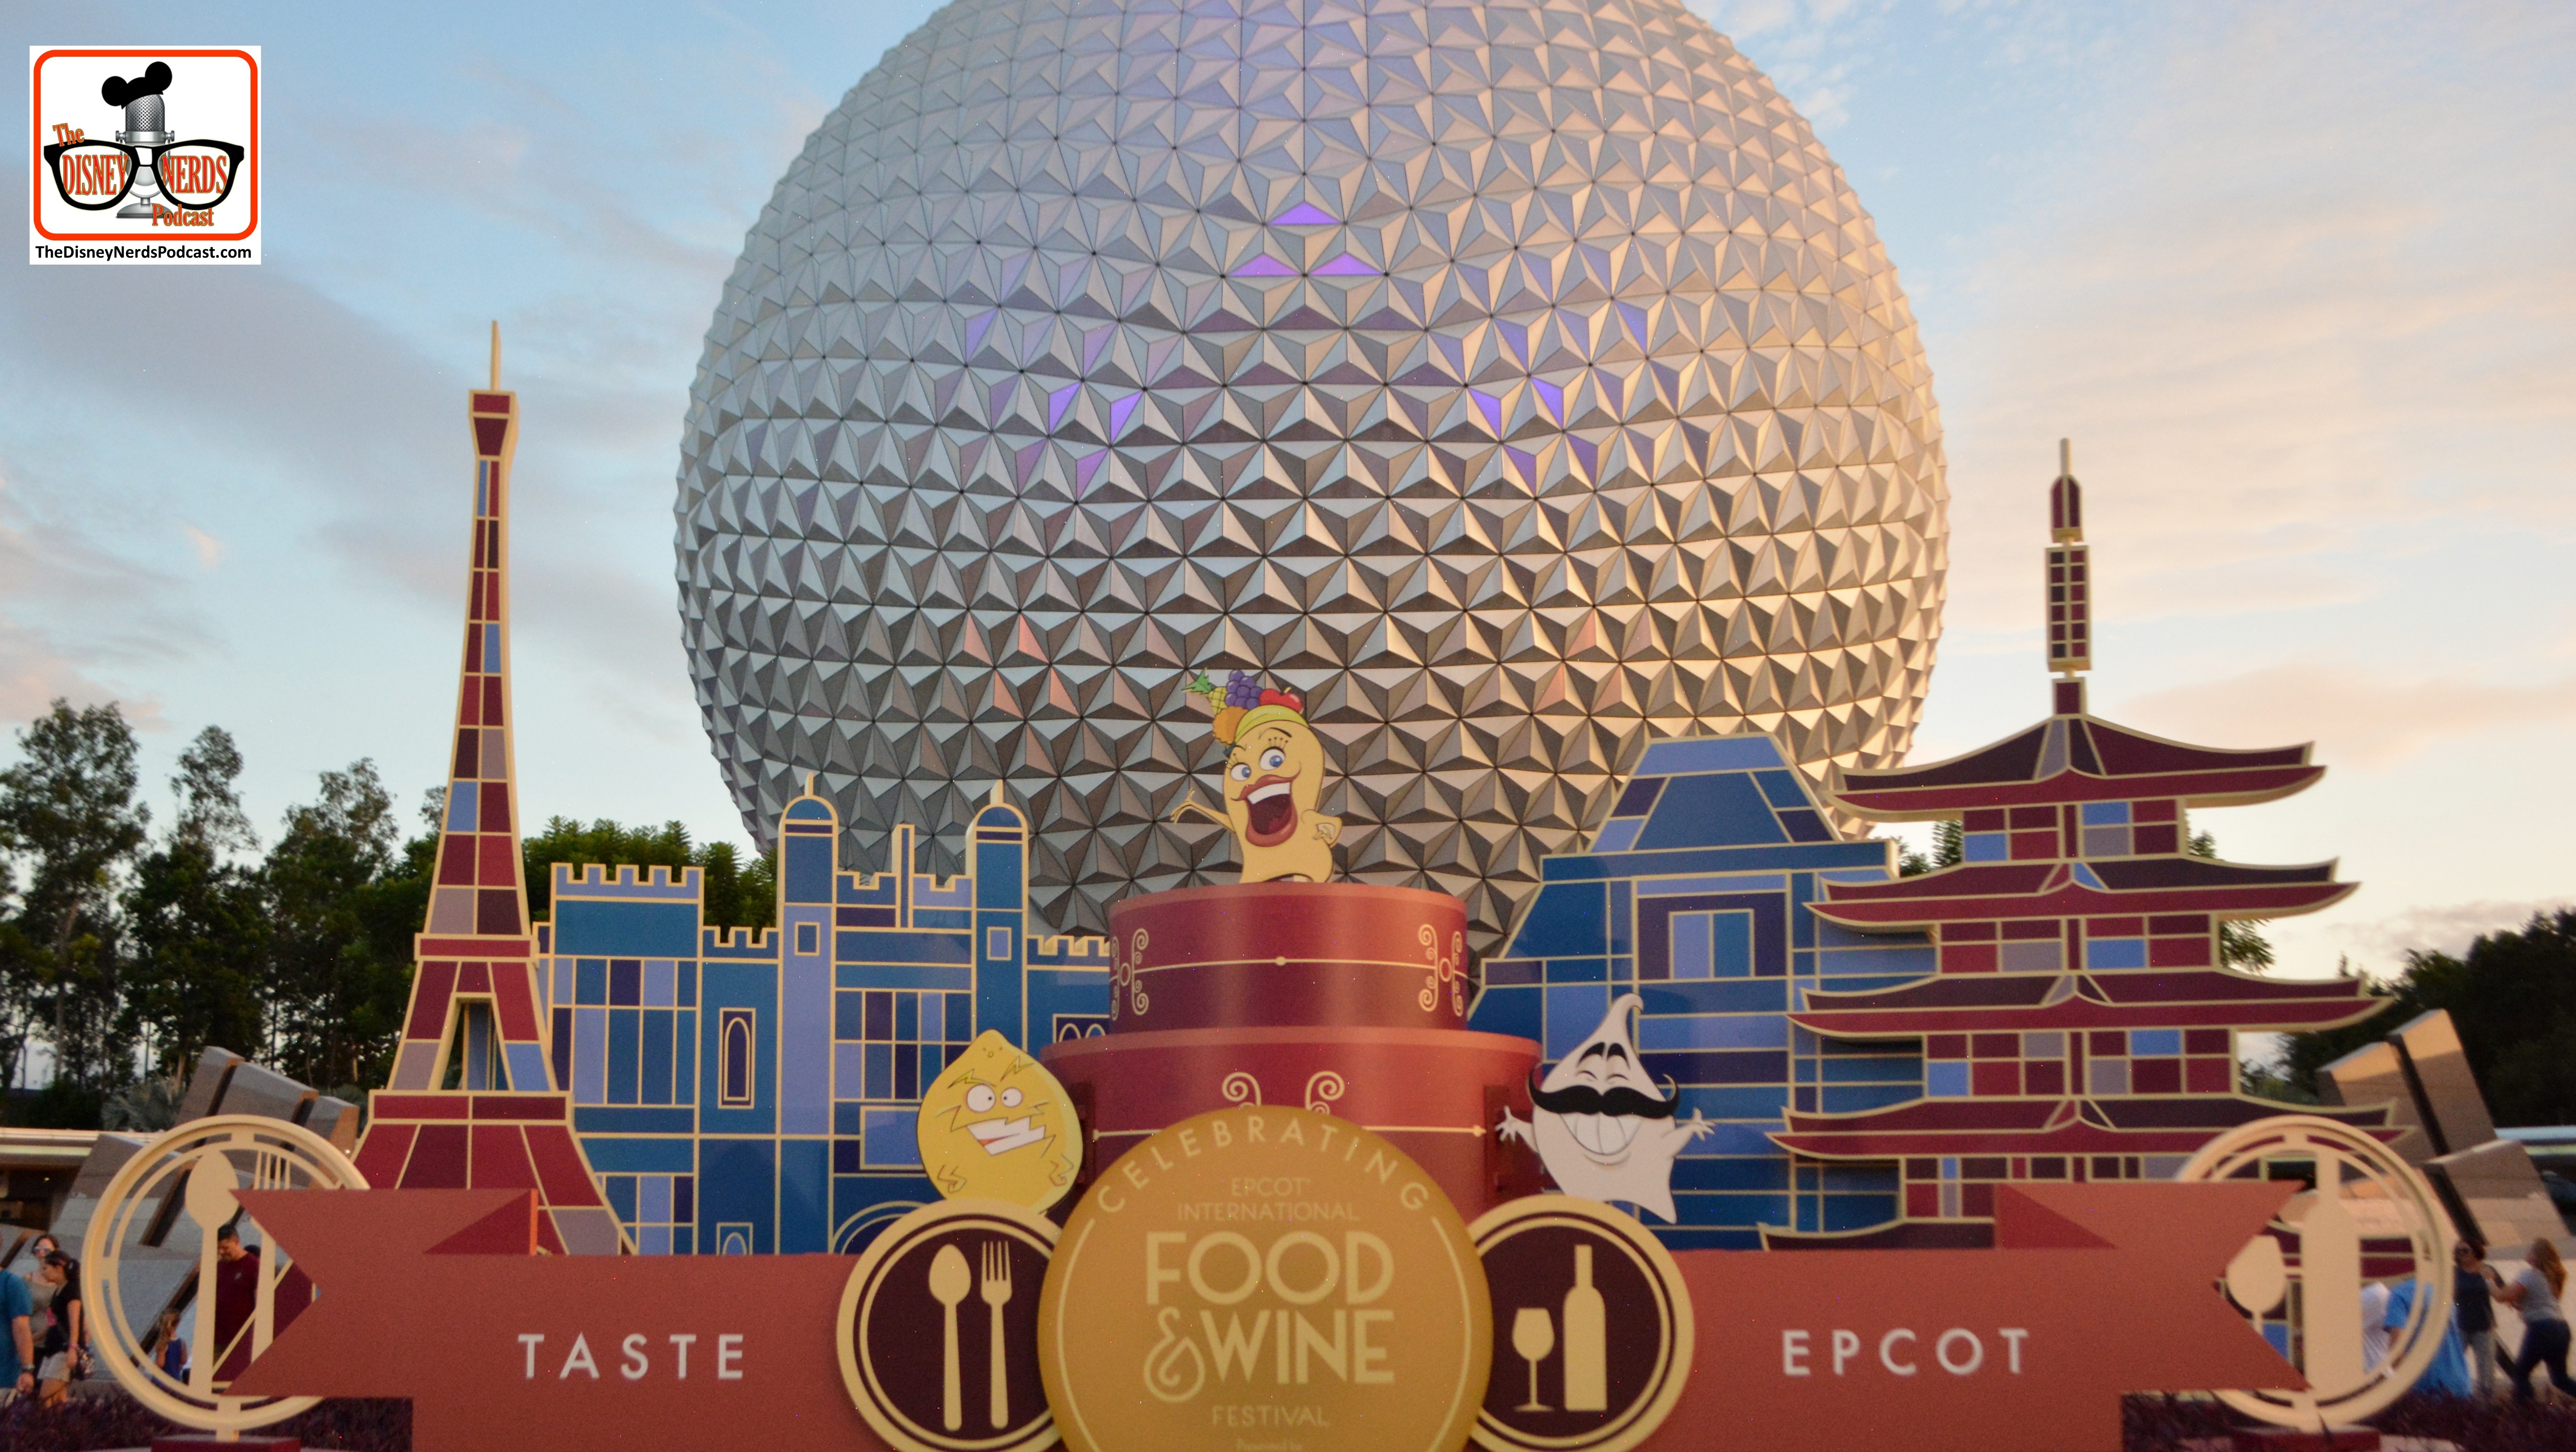 The 20th Anniversary of the Epcot International Food and Wine Festival.. "Taste Epcot" The new "Taste Buds" show up in a few places this year...